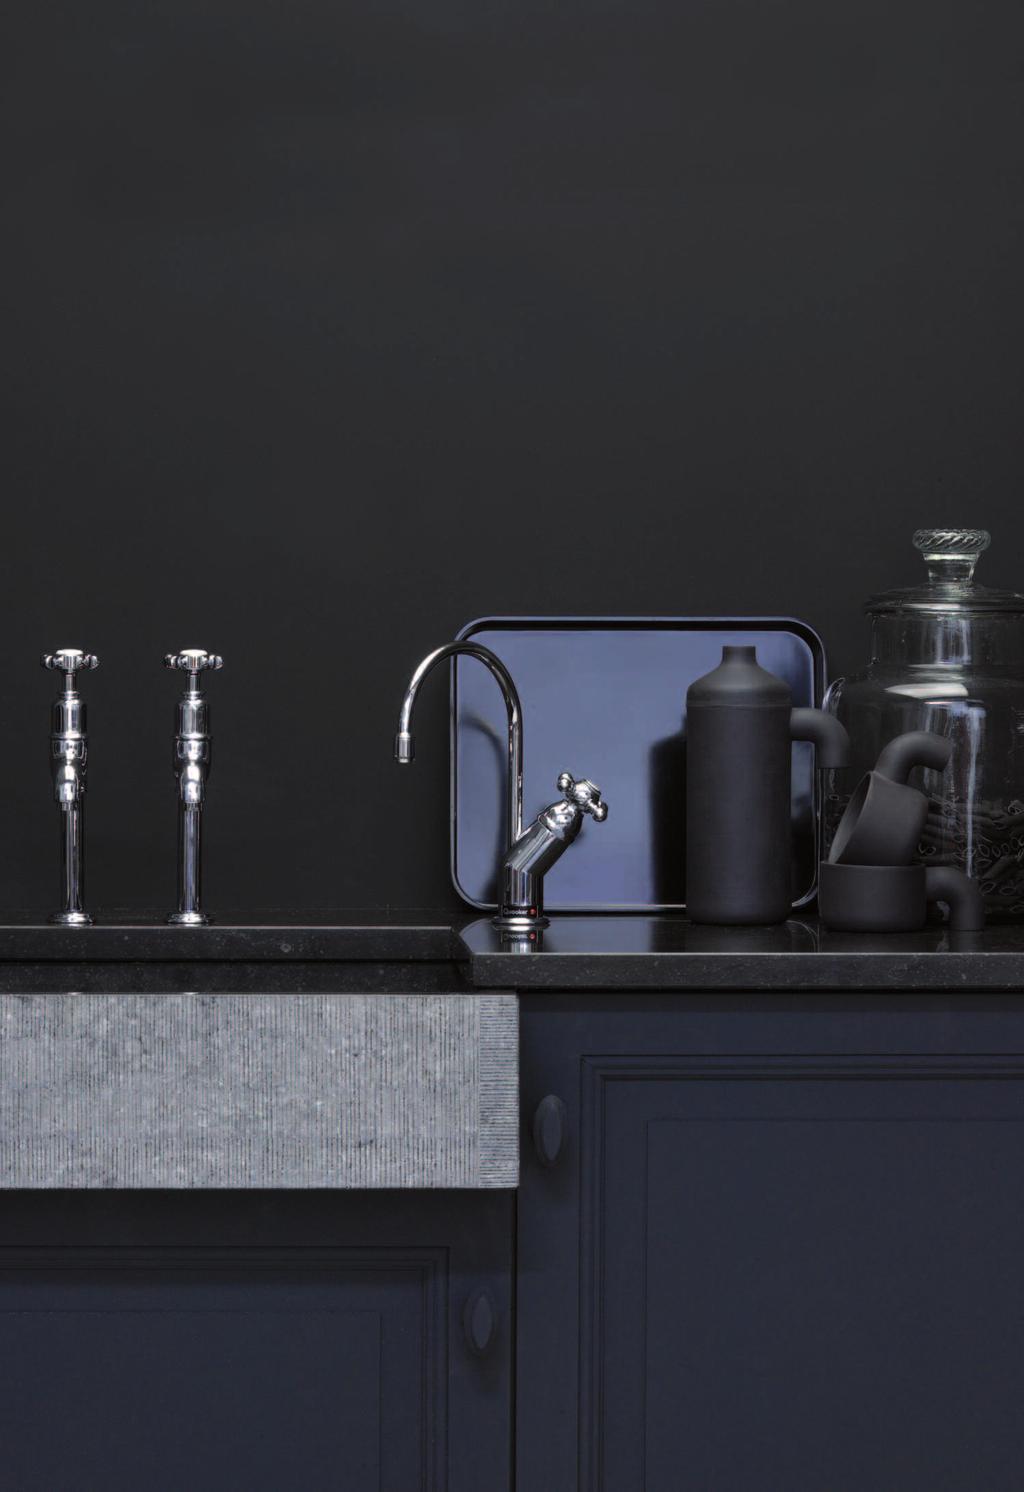 appliances) redundant, a Quooker tap helps liberate your worktop!